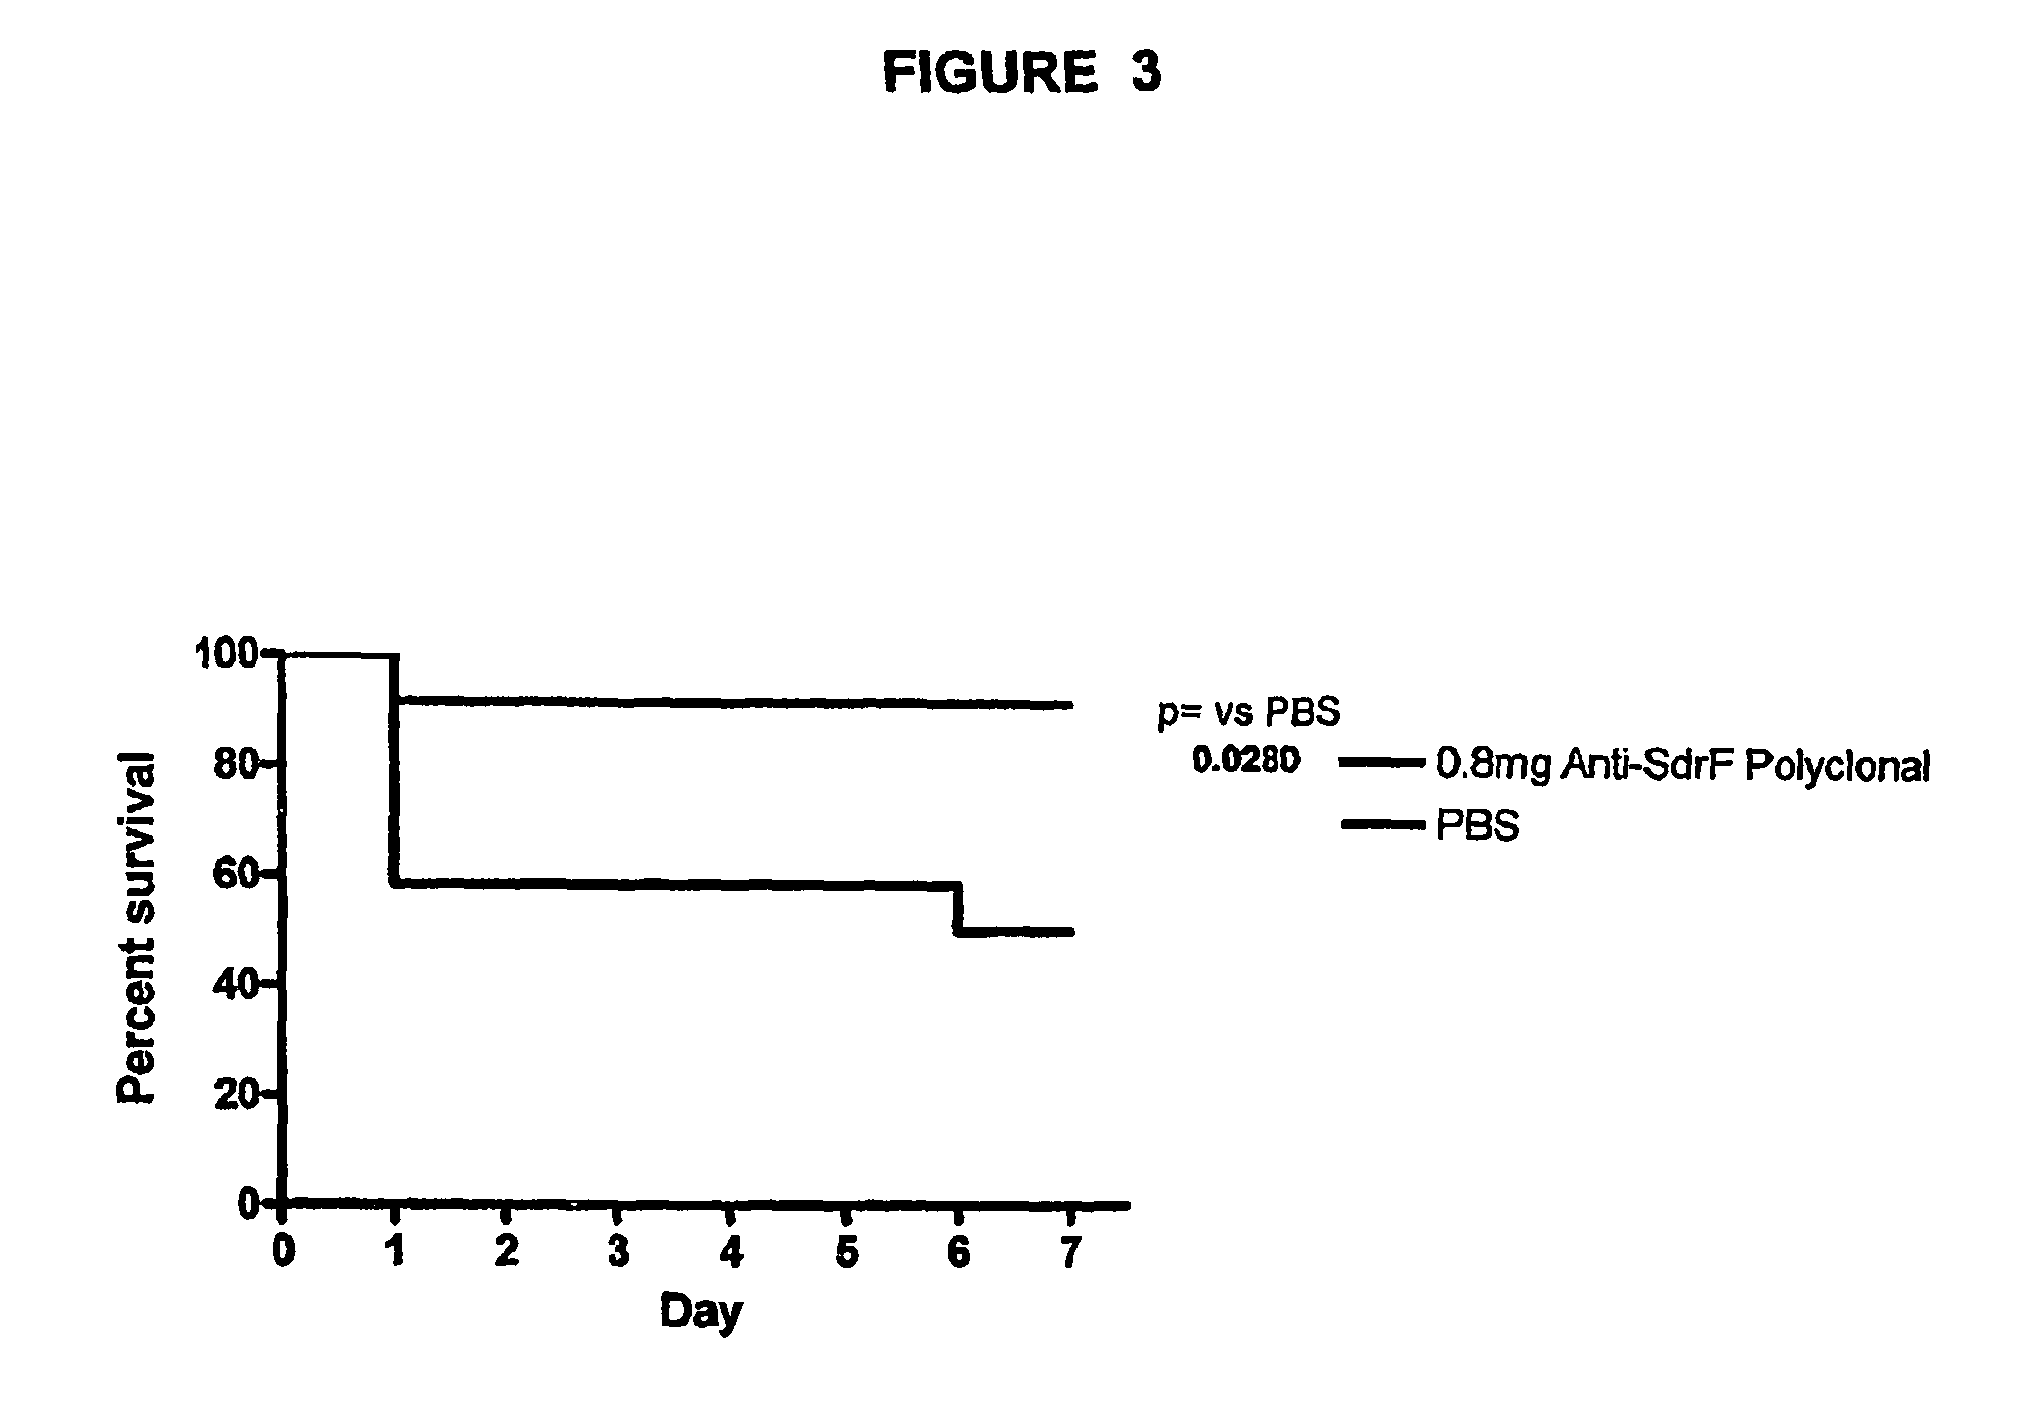 Monoclonal antibodies recognizing a coagulase-negative staphylococcal protein